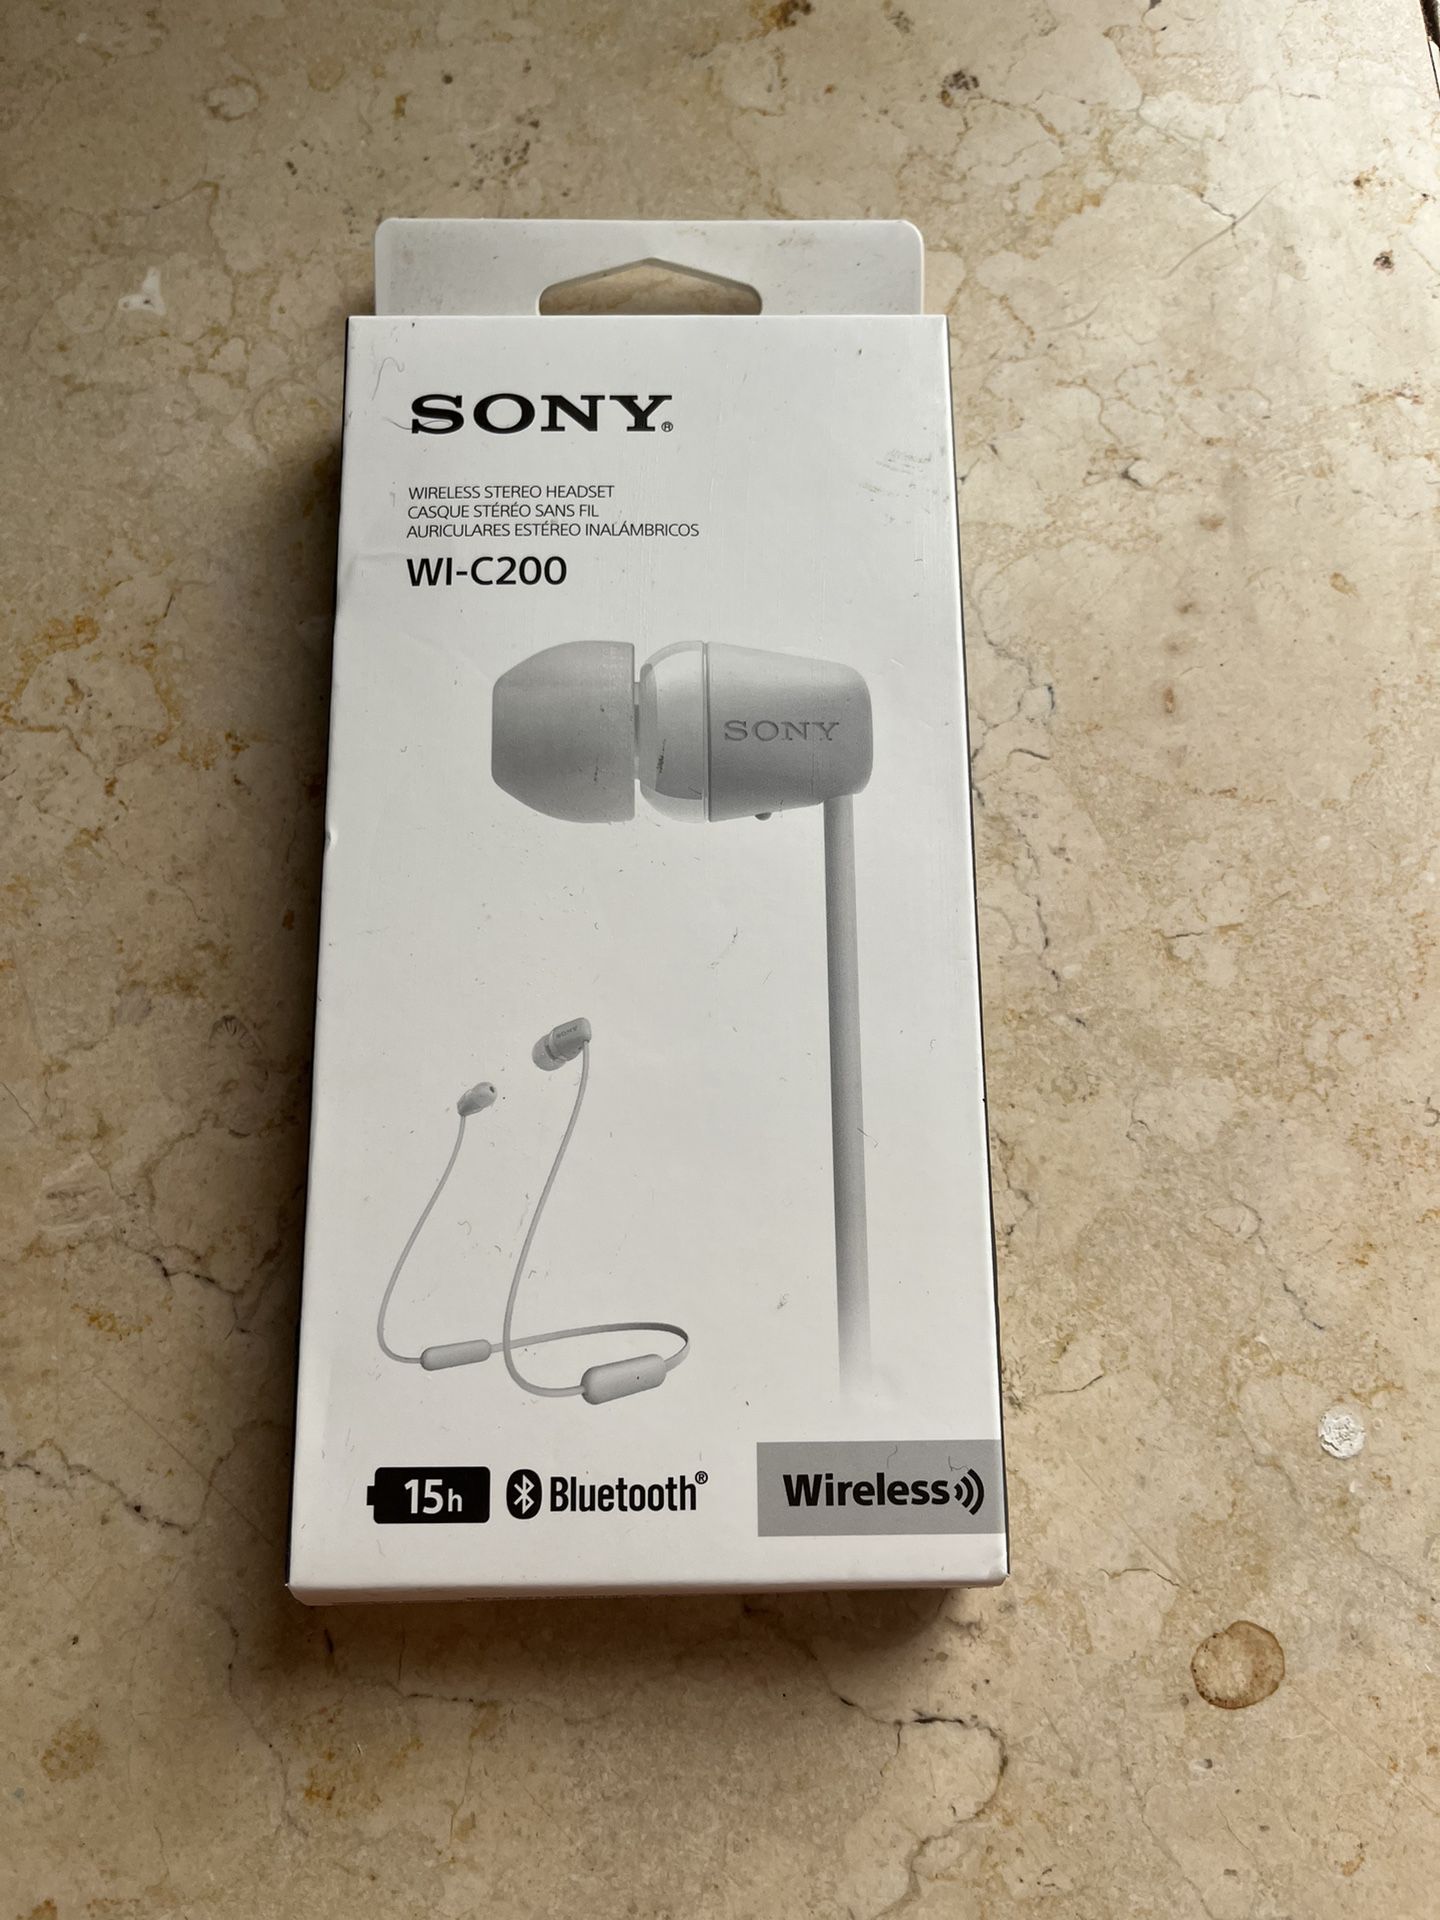 NEW SONY WI-C200 WIRELESS STEREO HADSET COLOR: WHITE FAST FREE SHIPPING 